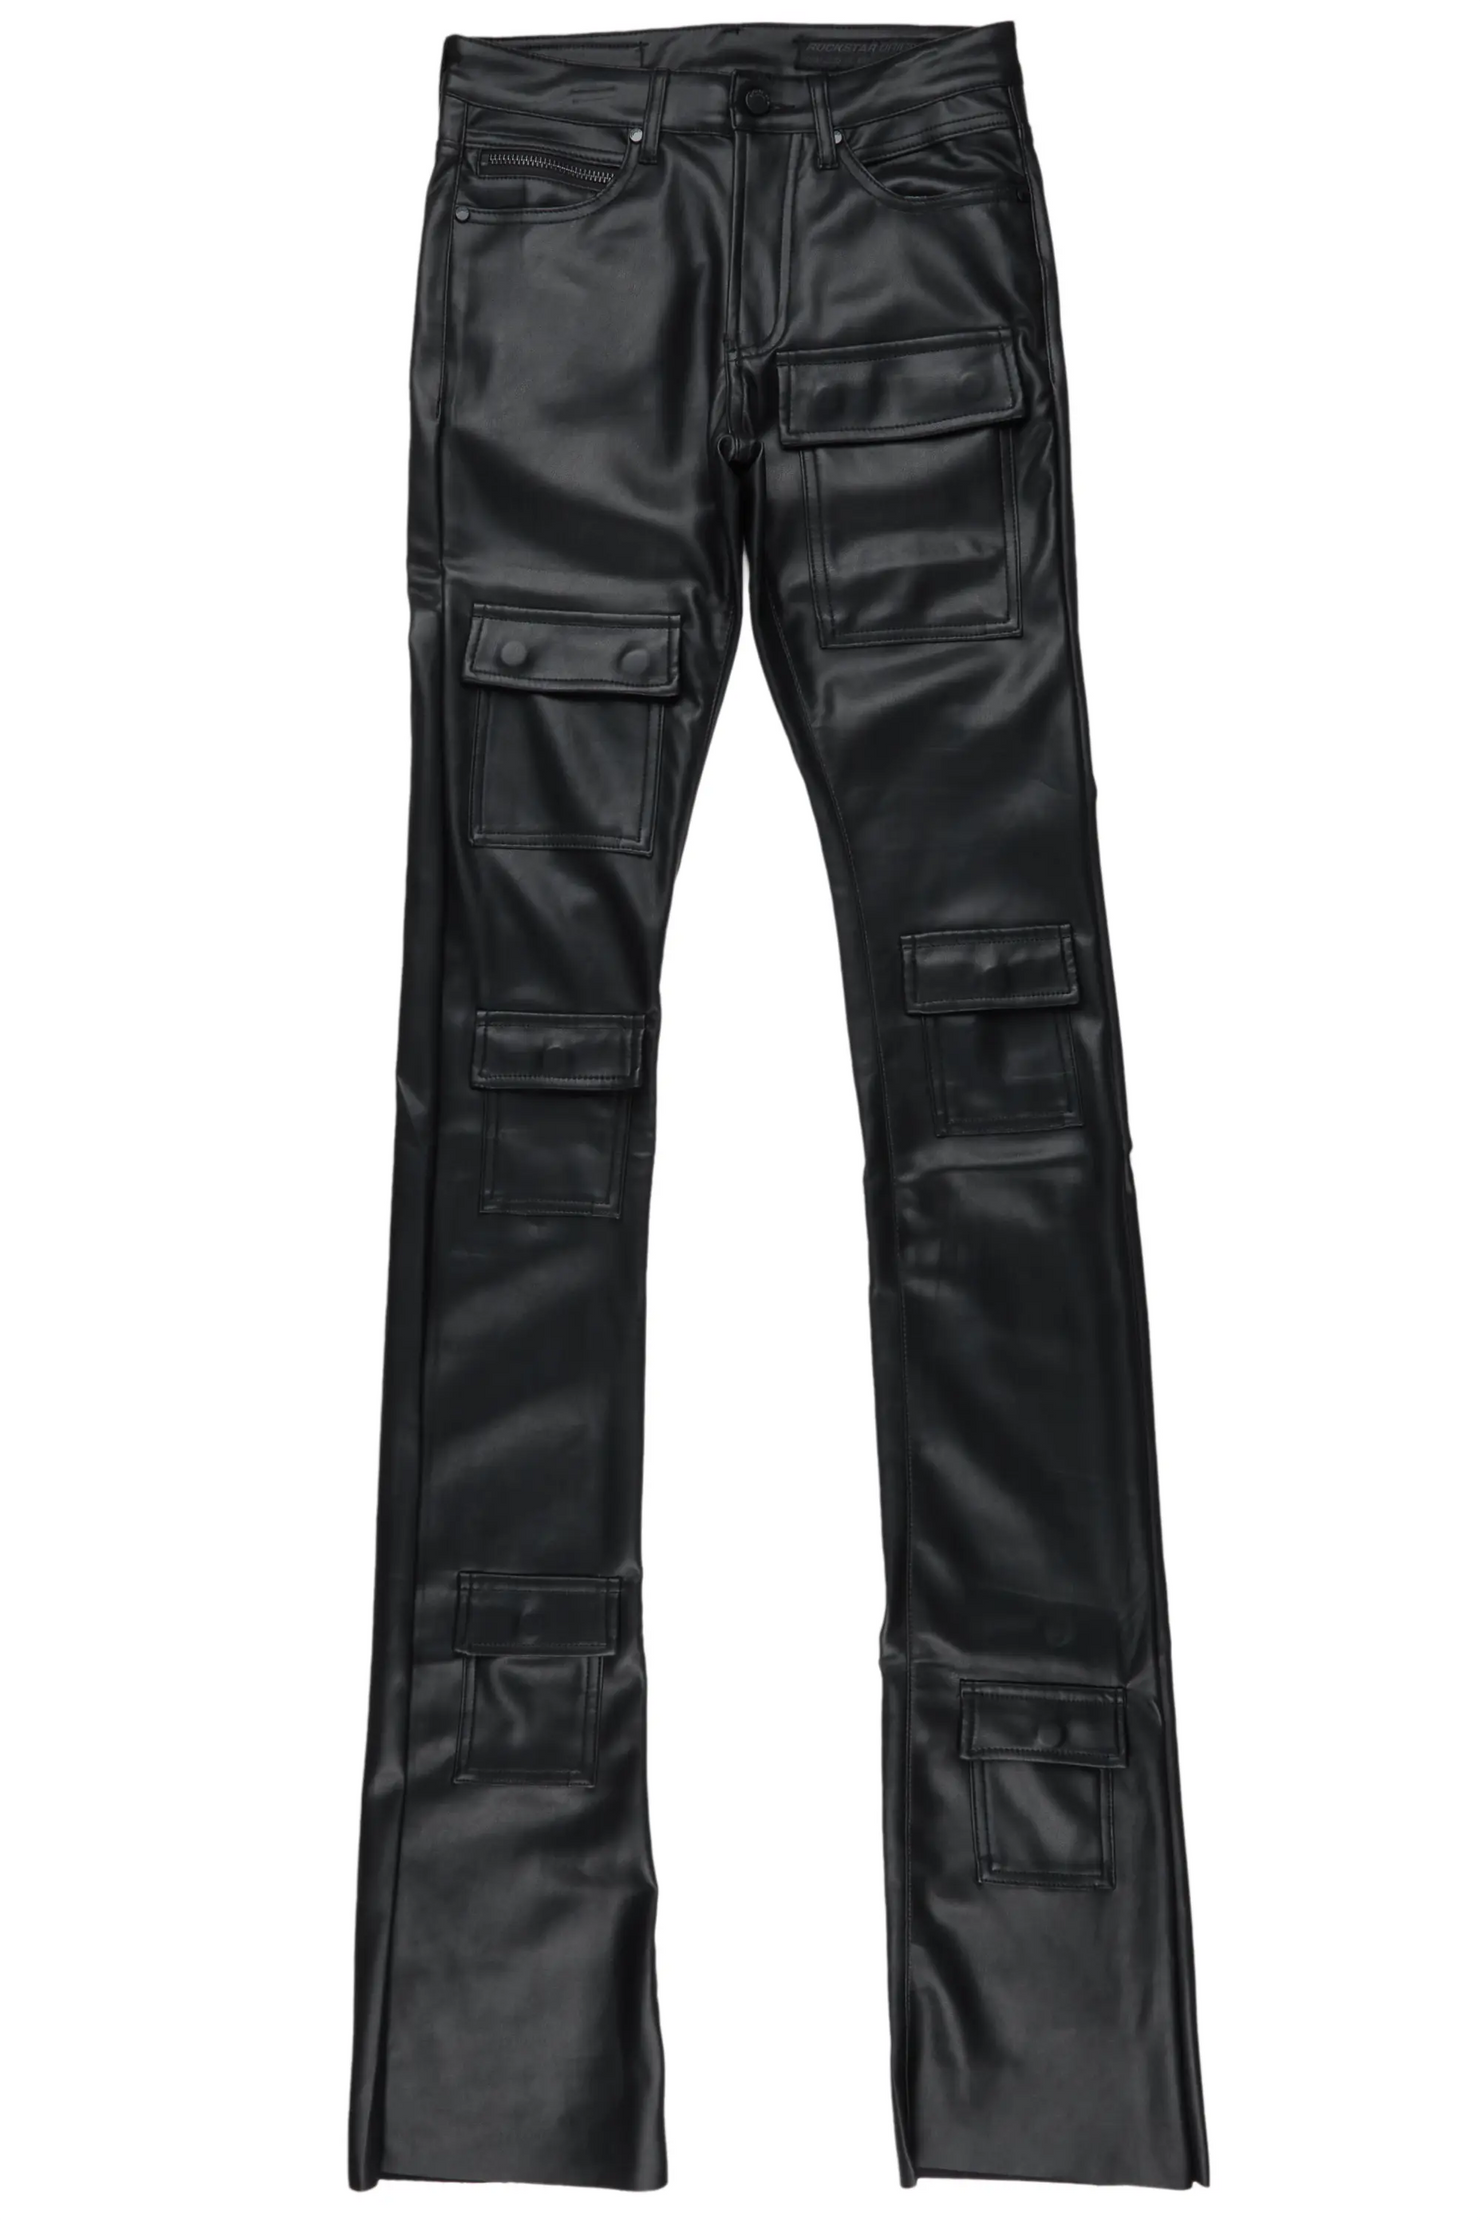 Petrus Black Faux Leather Super Stacked Flare Jean